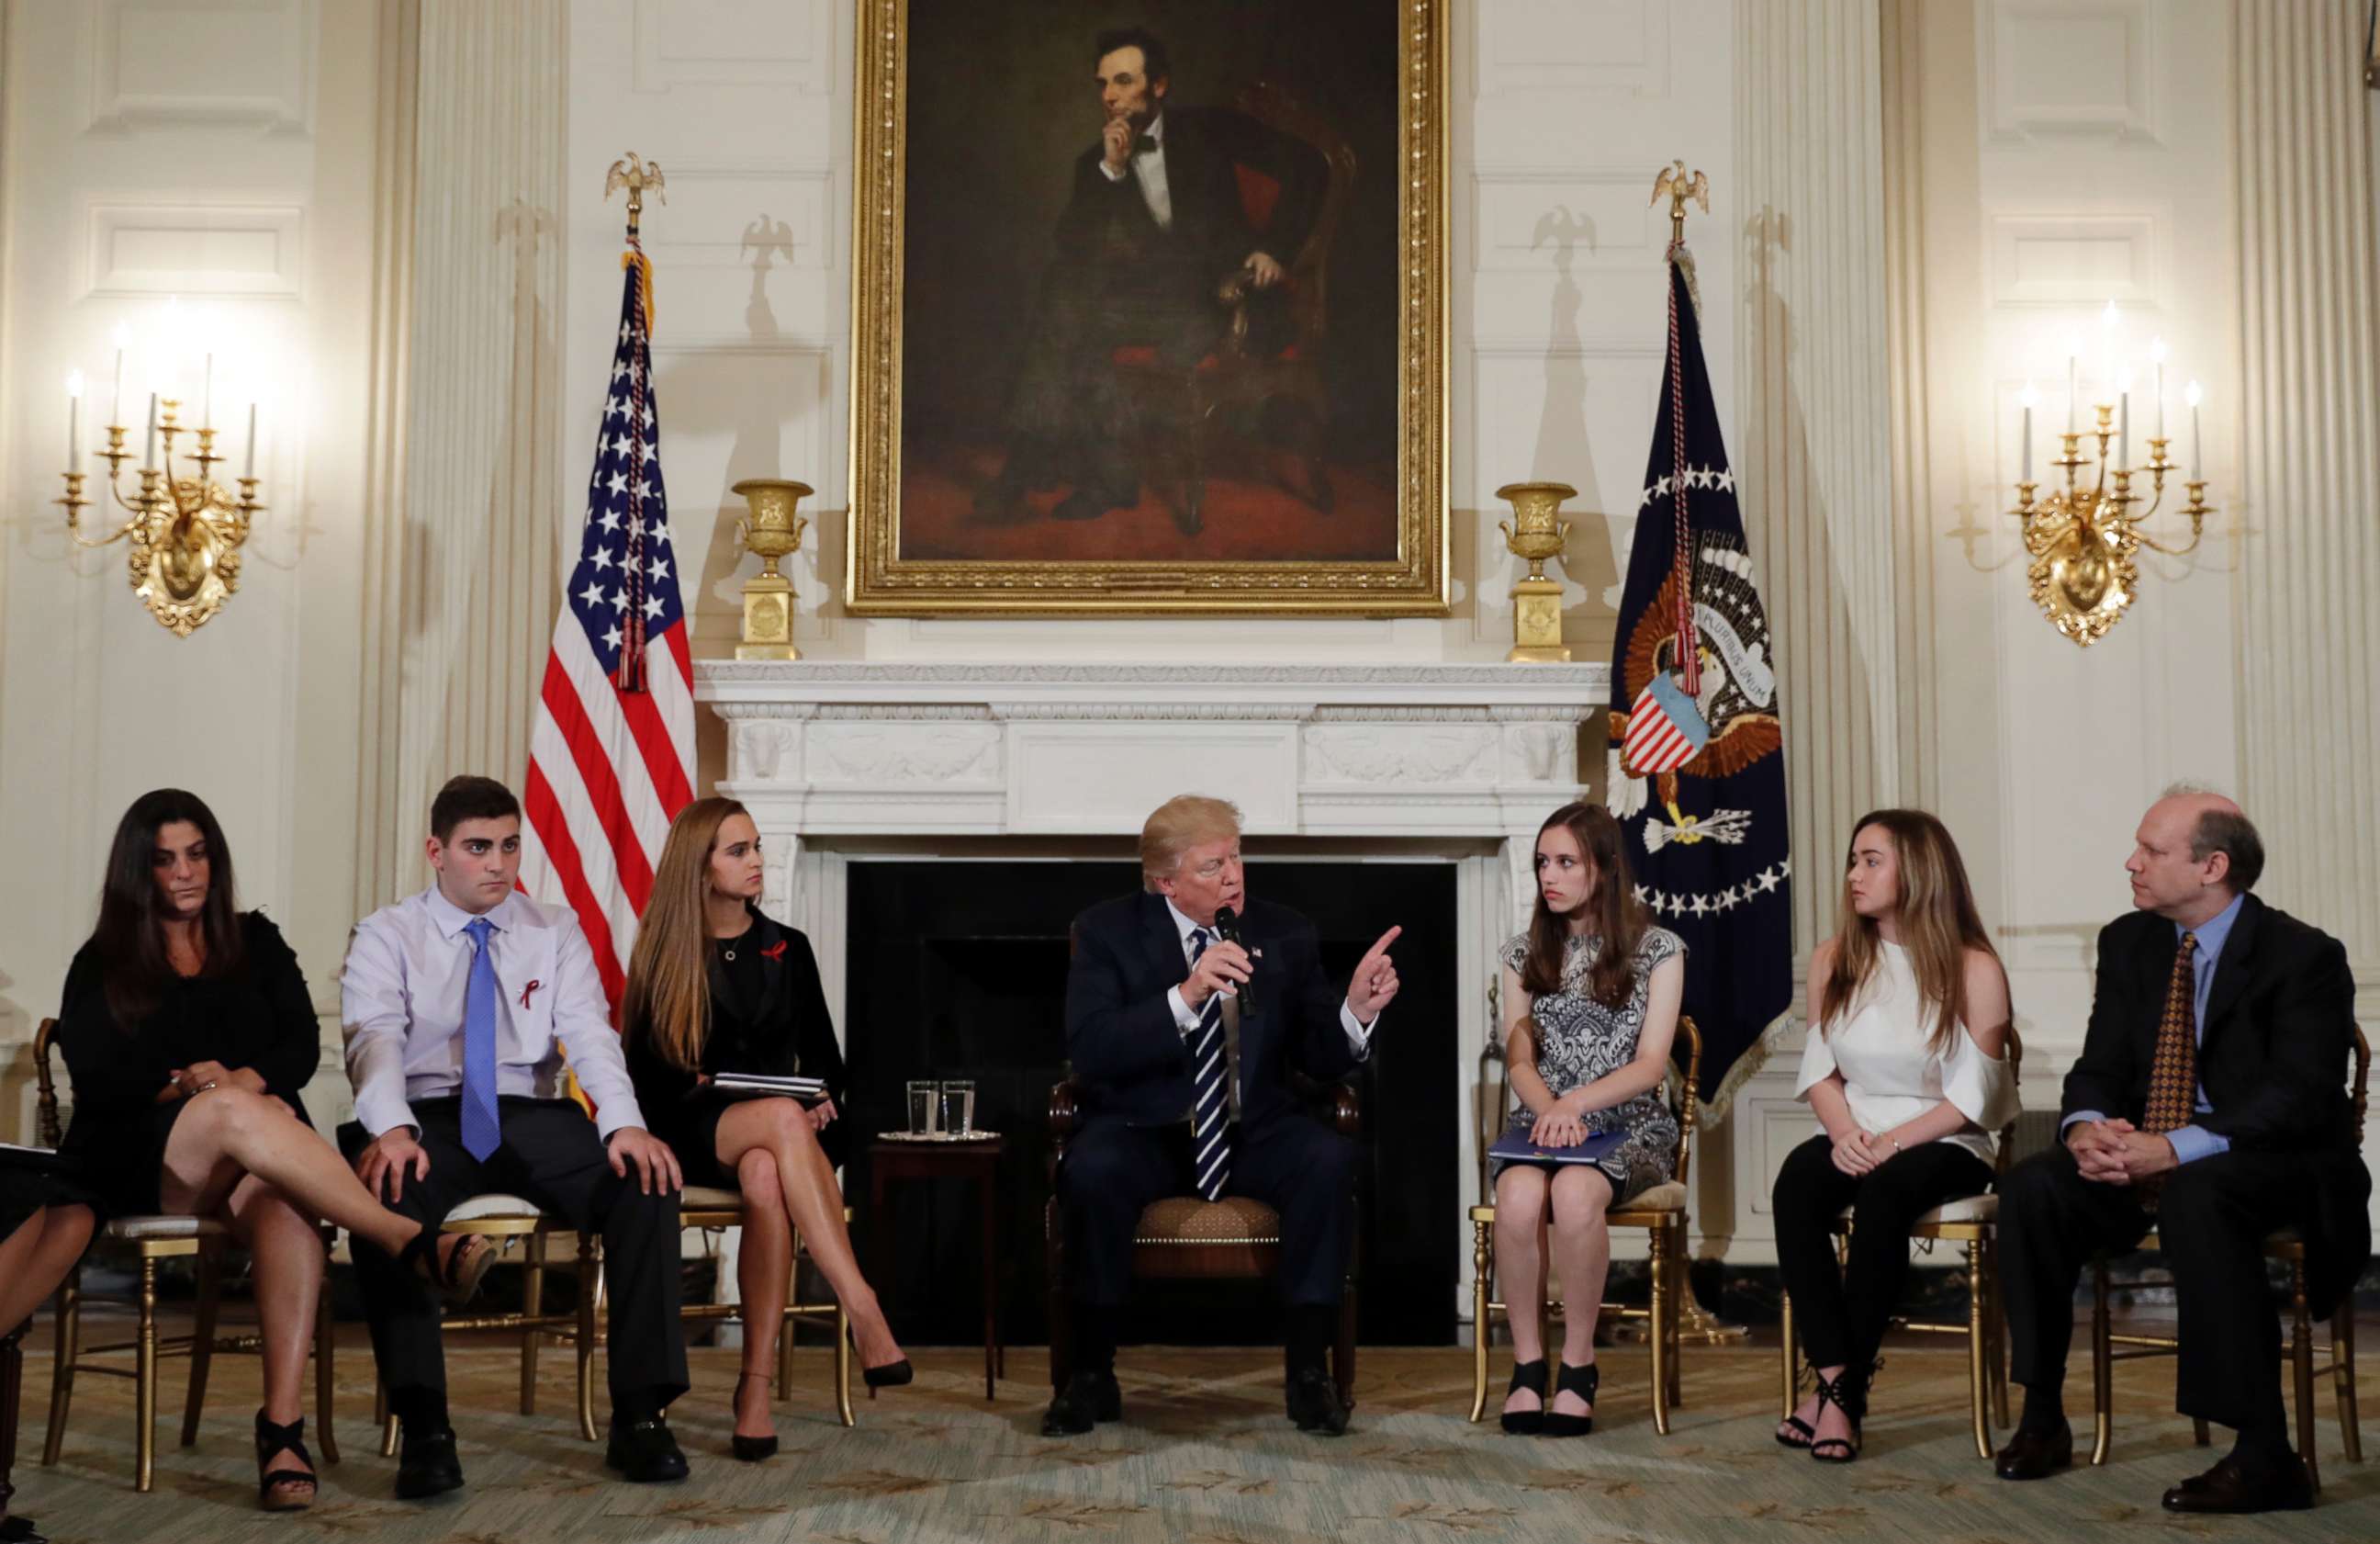 PHOTO: President Donald Trump speaks as he hosts a listening session with high school students, teachers and parents in the State Dining Room of the White House in Washington, D.C., Feb. 21, 2018.